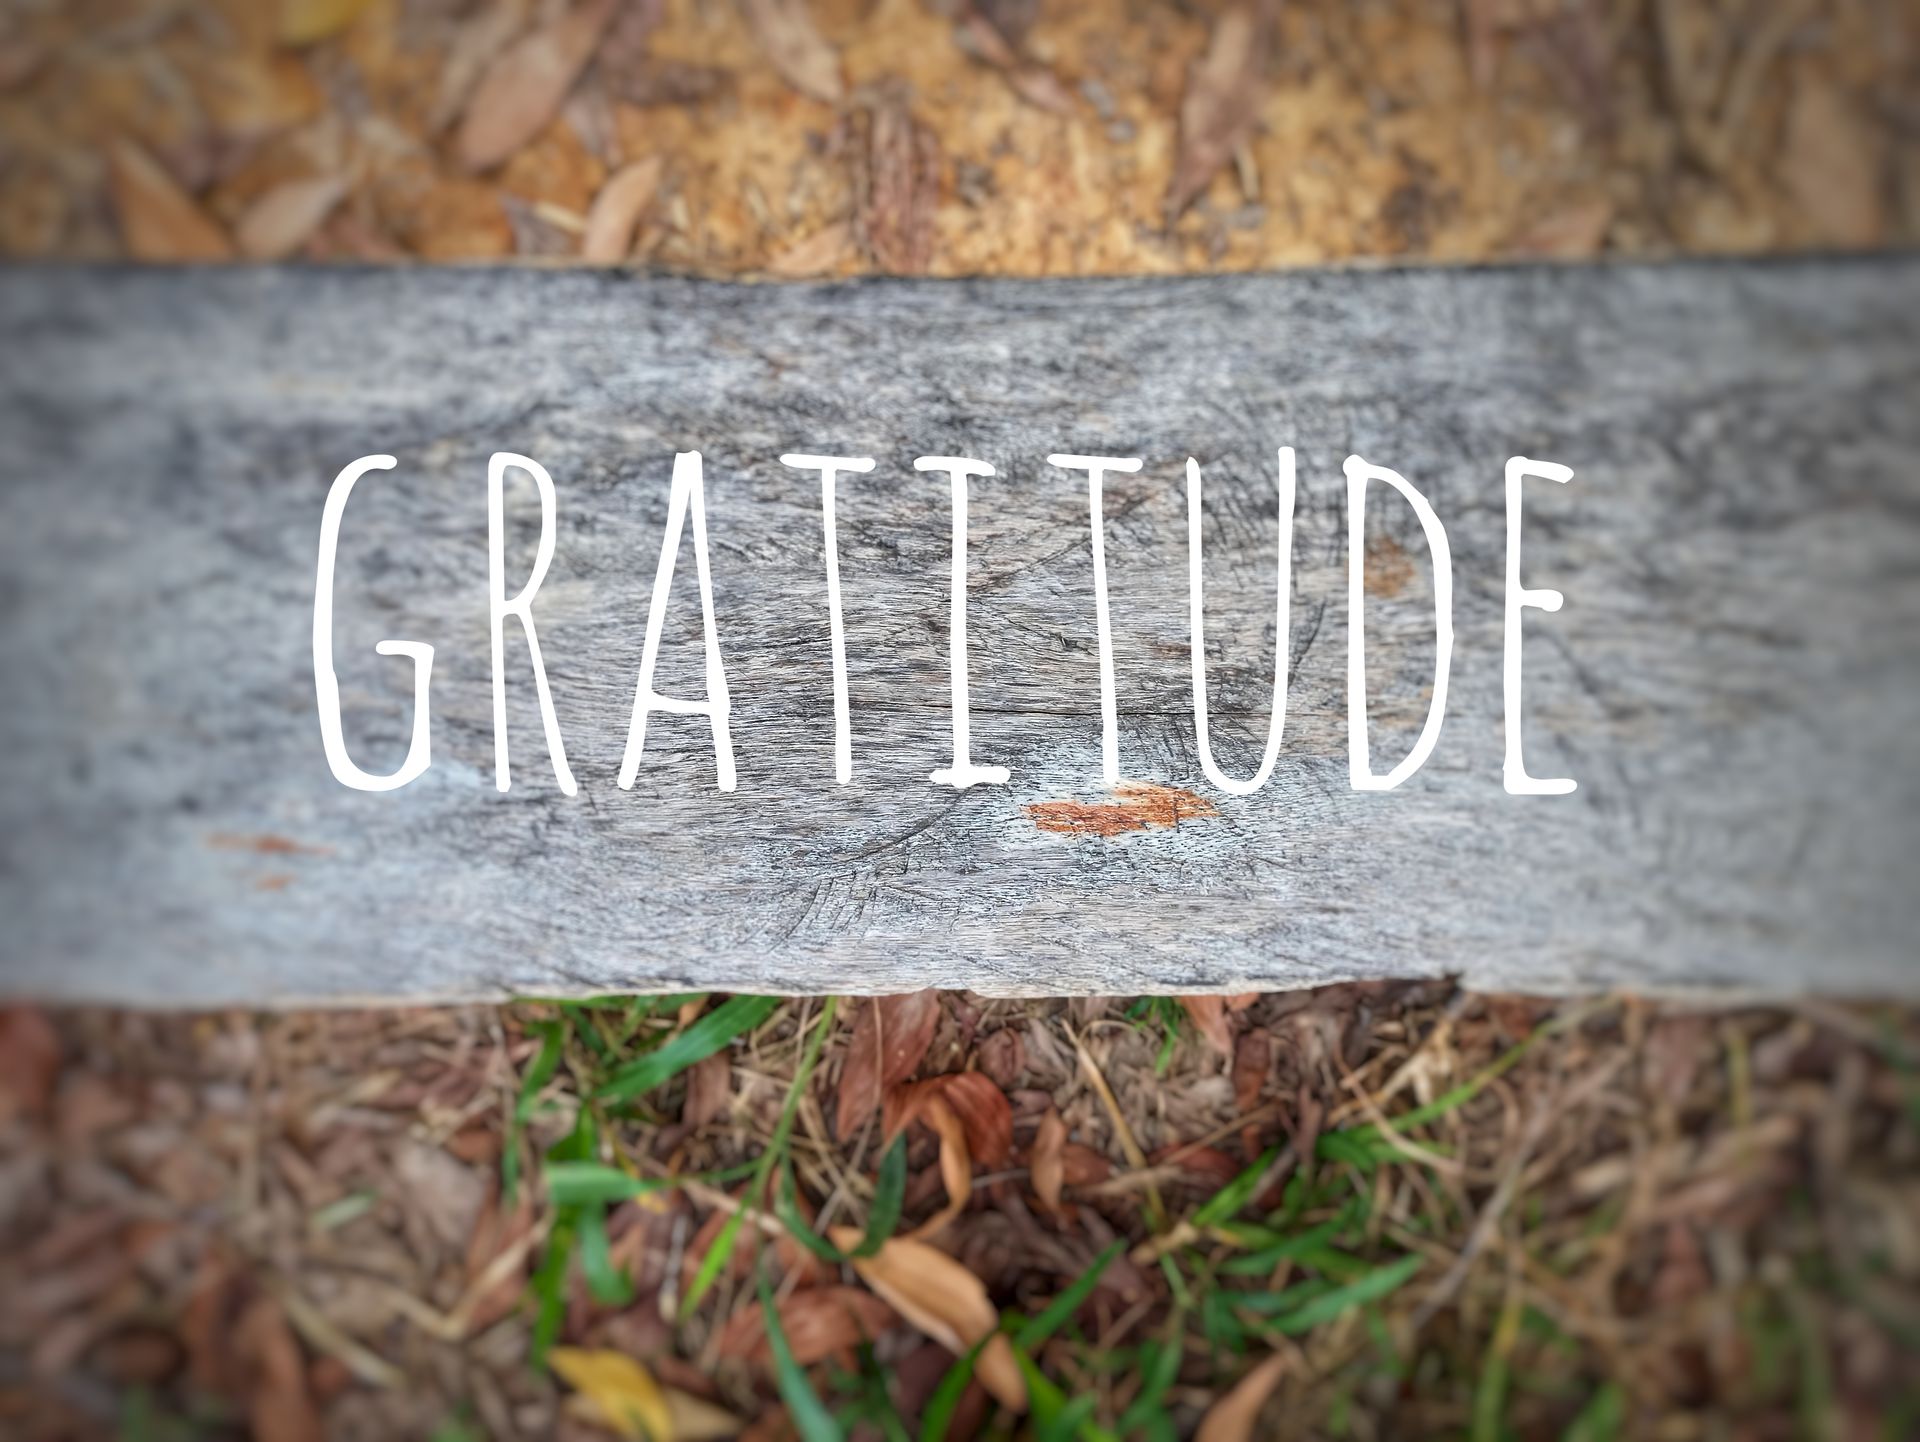 Gratitude is as simple as being thankful.